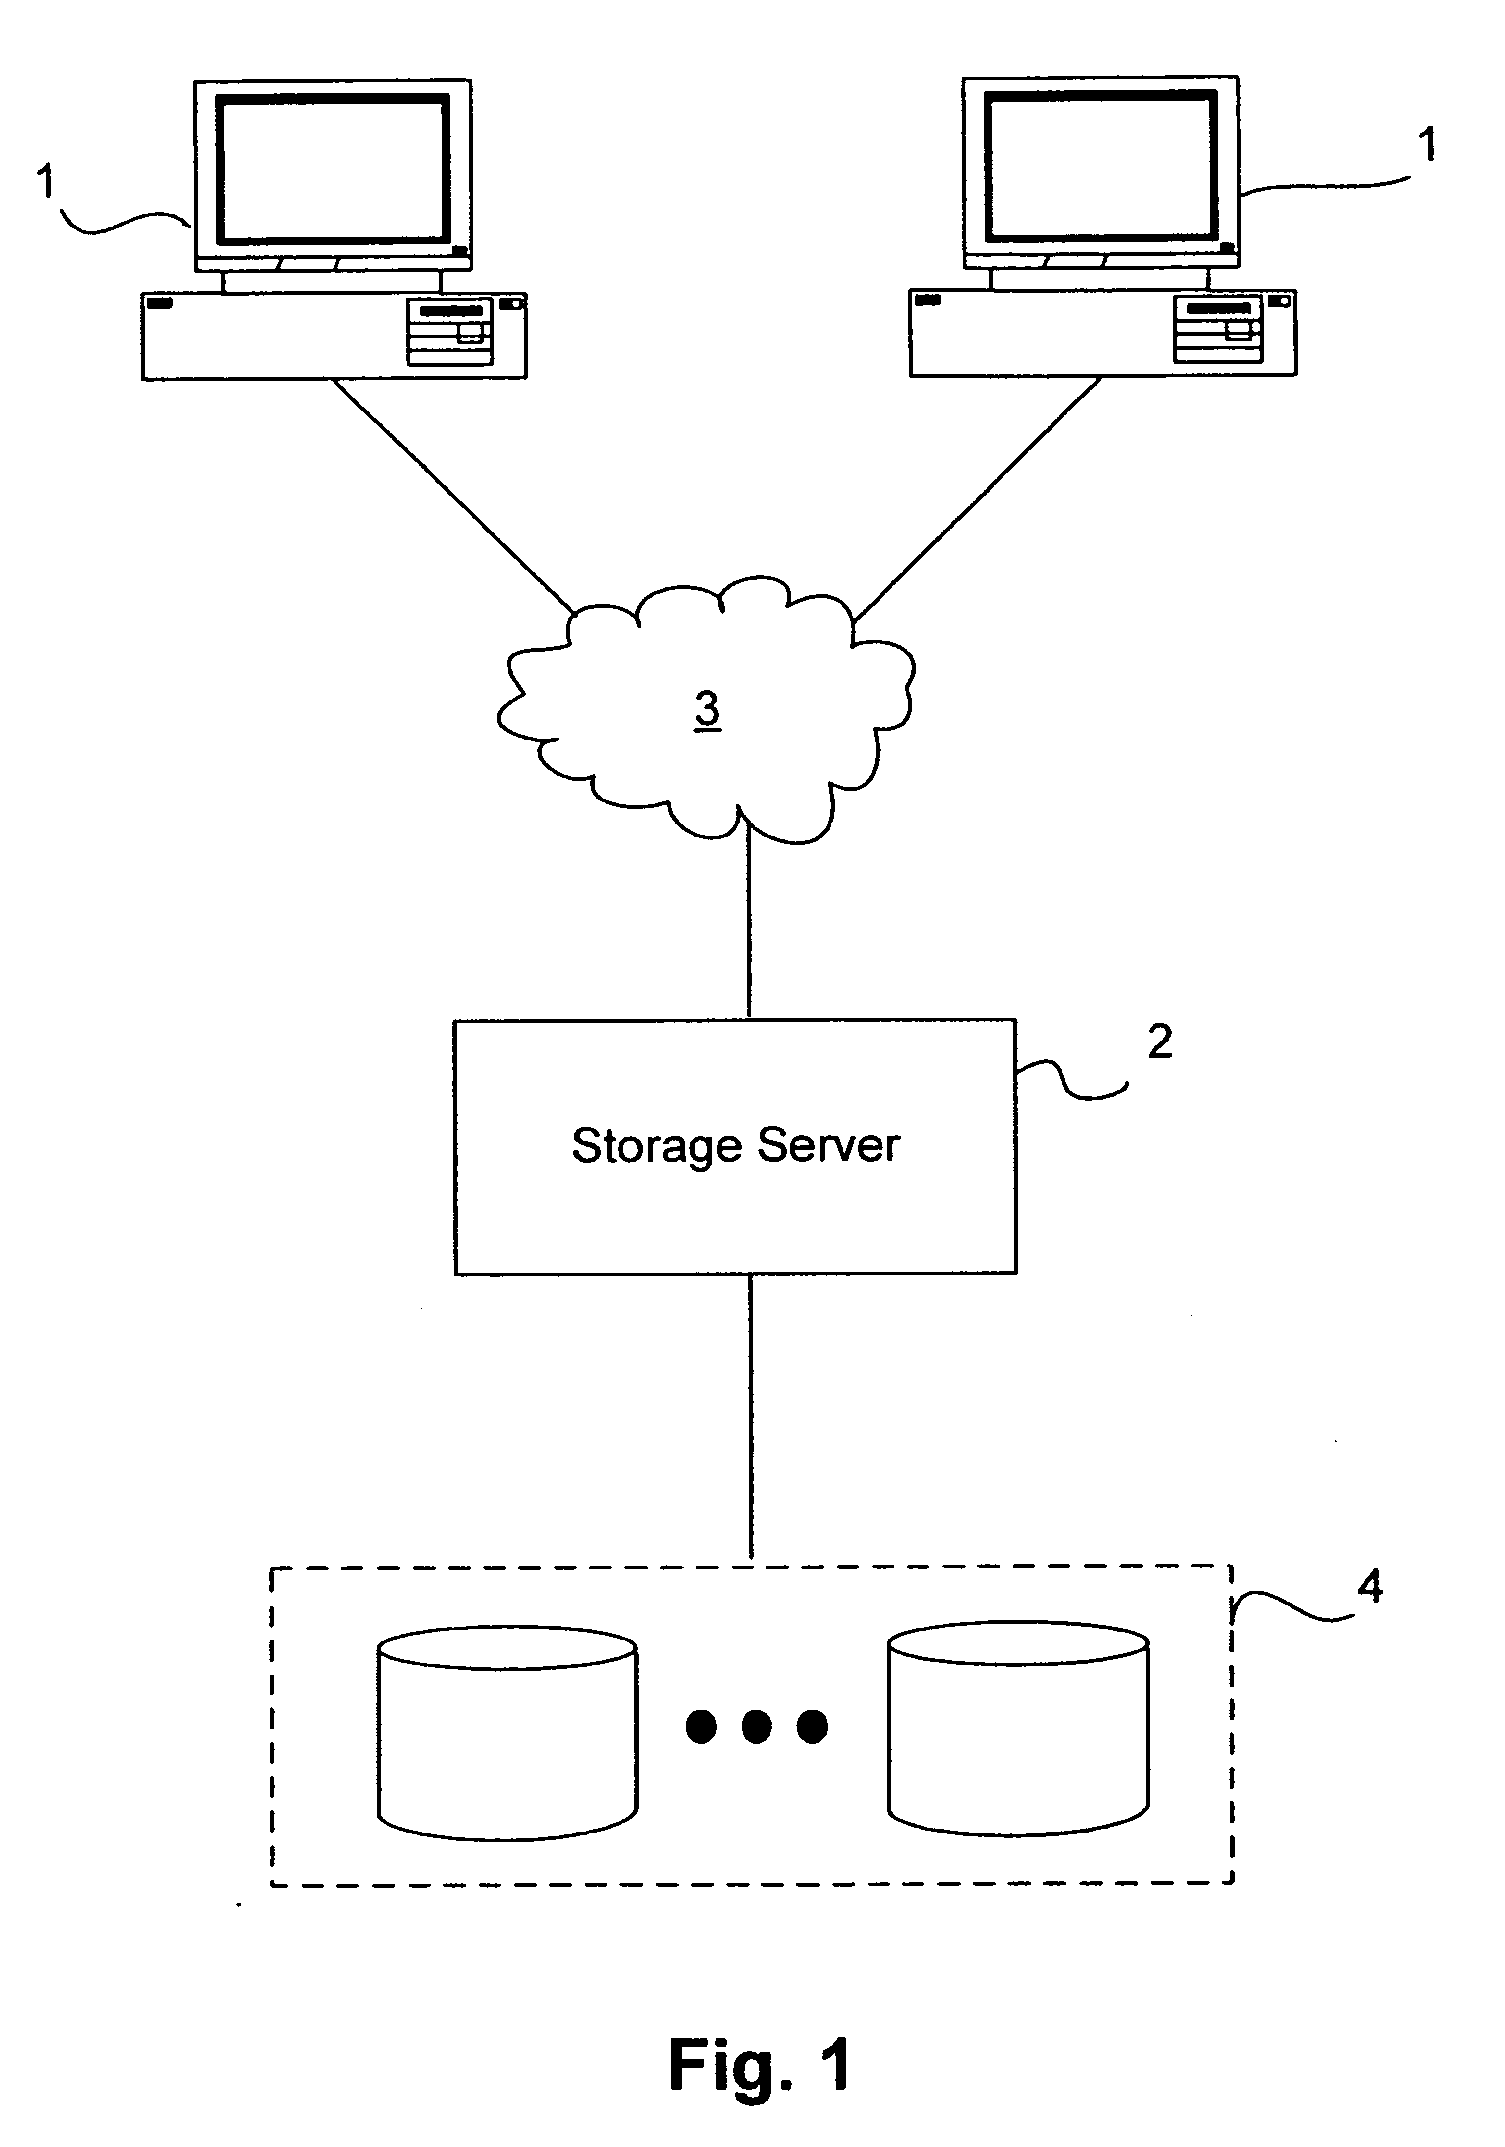 Method and apparatus for defragmentation and for detection of relocated blocks